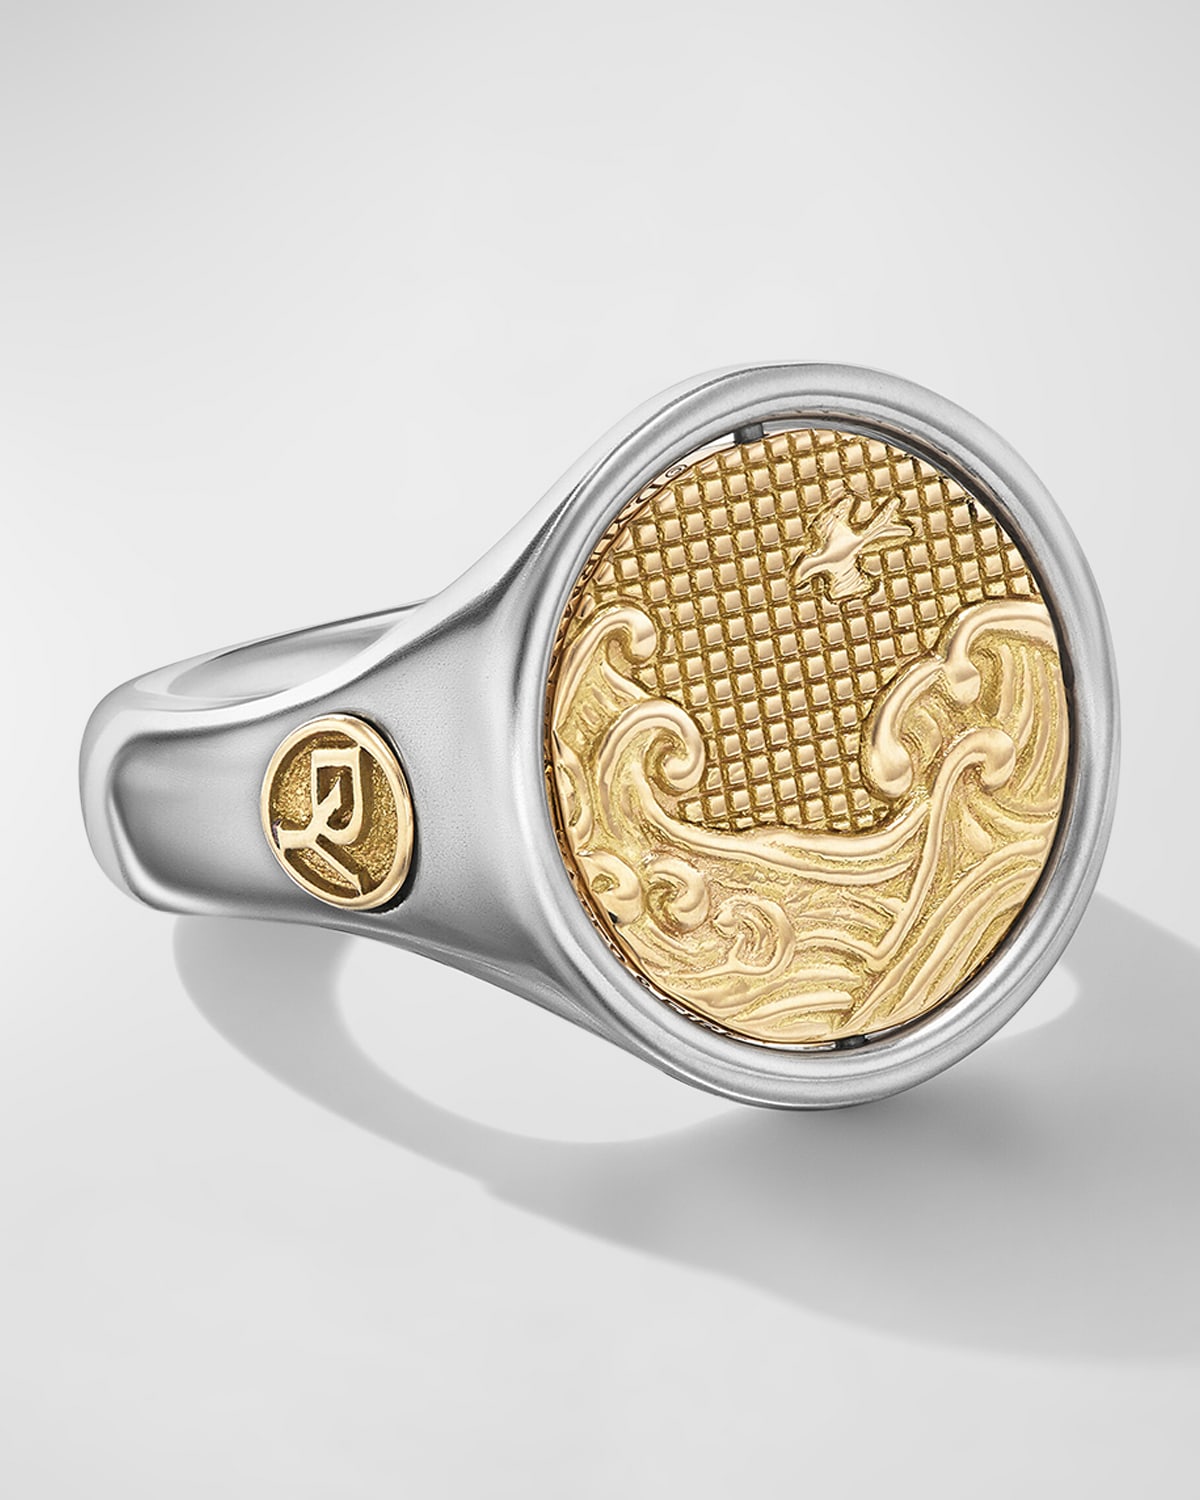 DAVID YURMAN MEN'S DUALITY SIGNET RING IN SILVER WITH 18K GOLD, 20MM